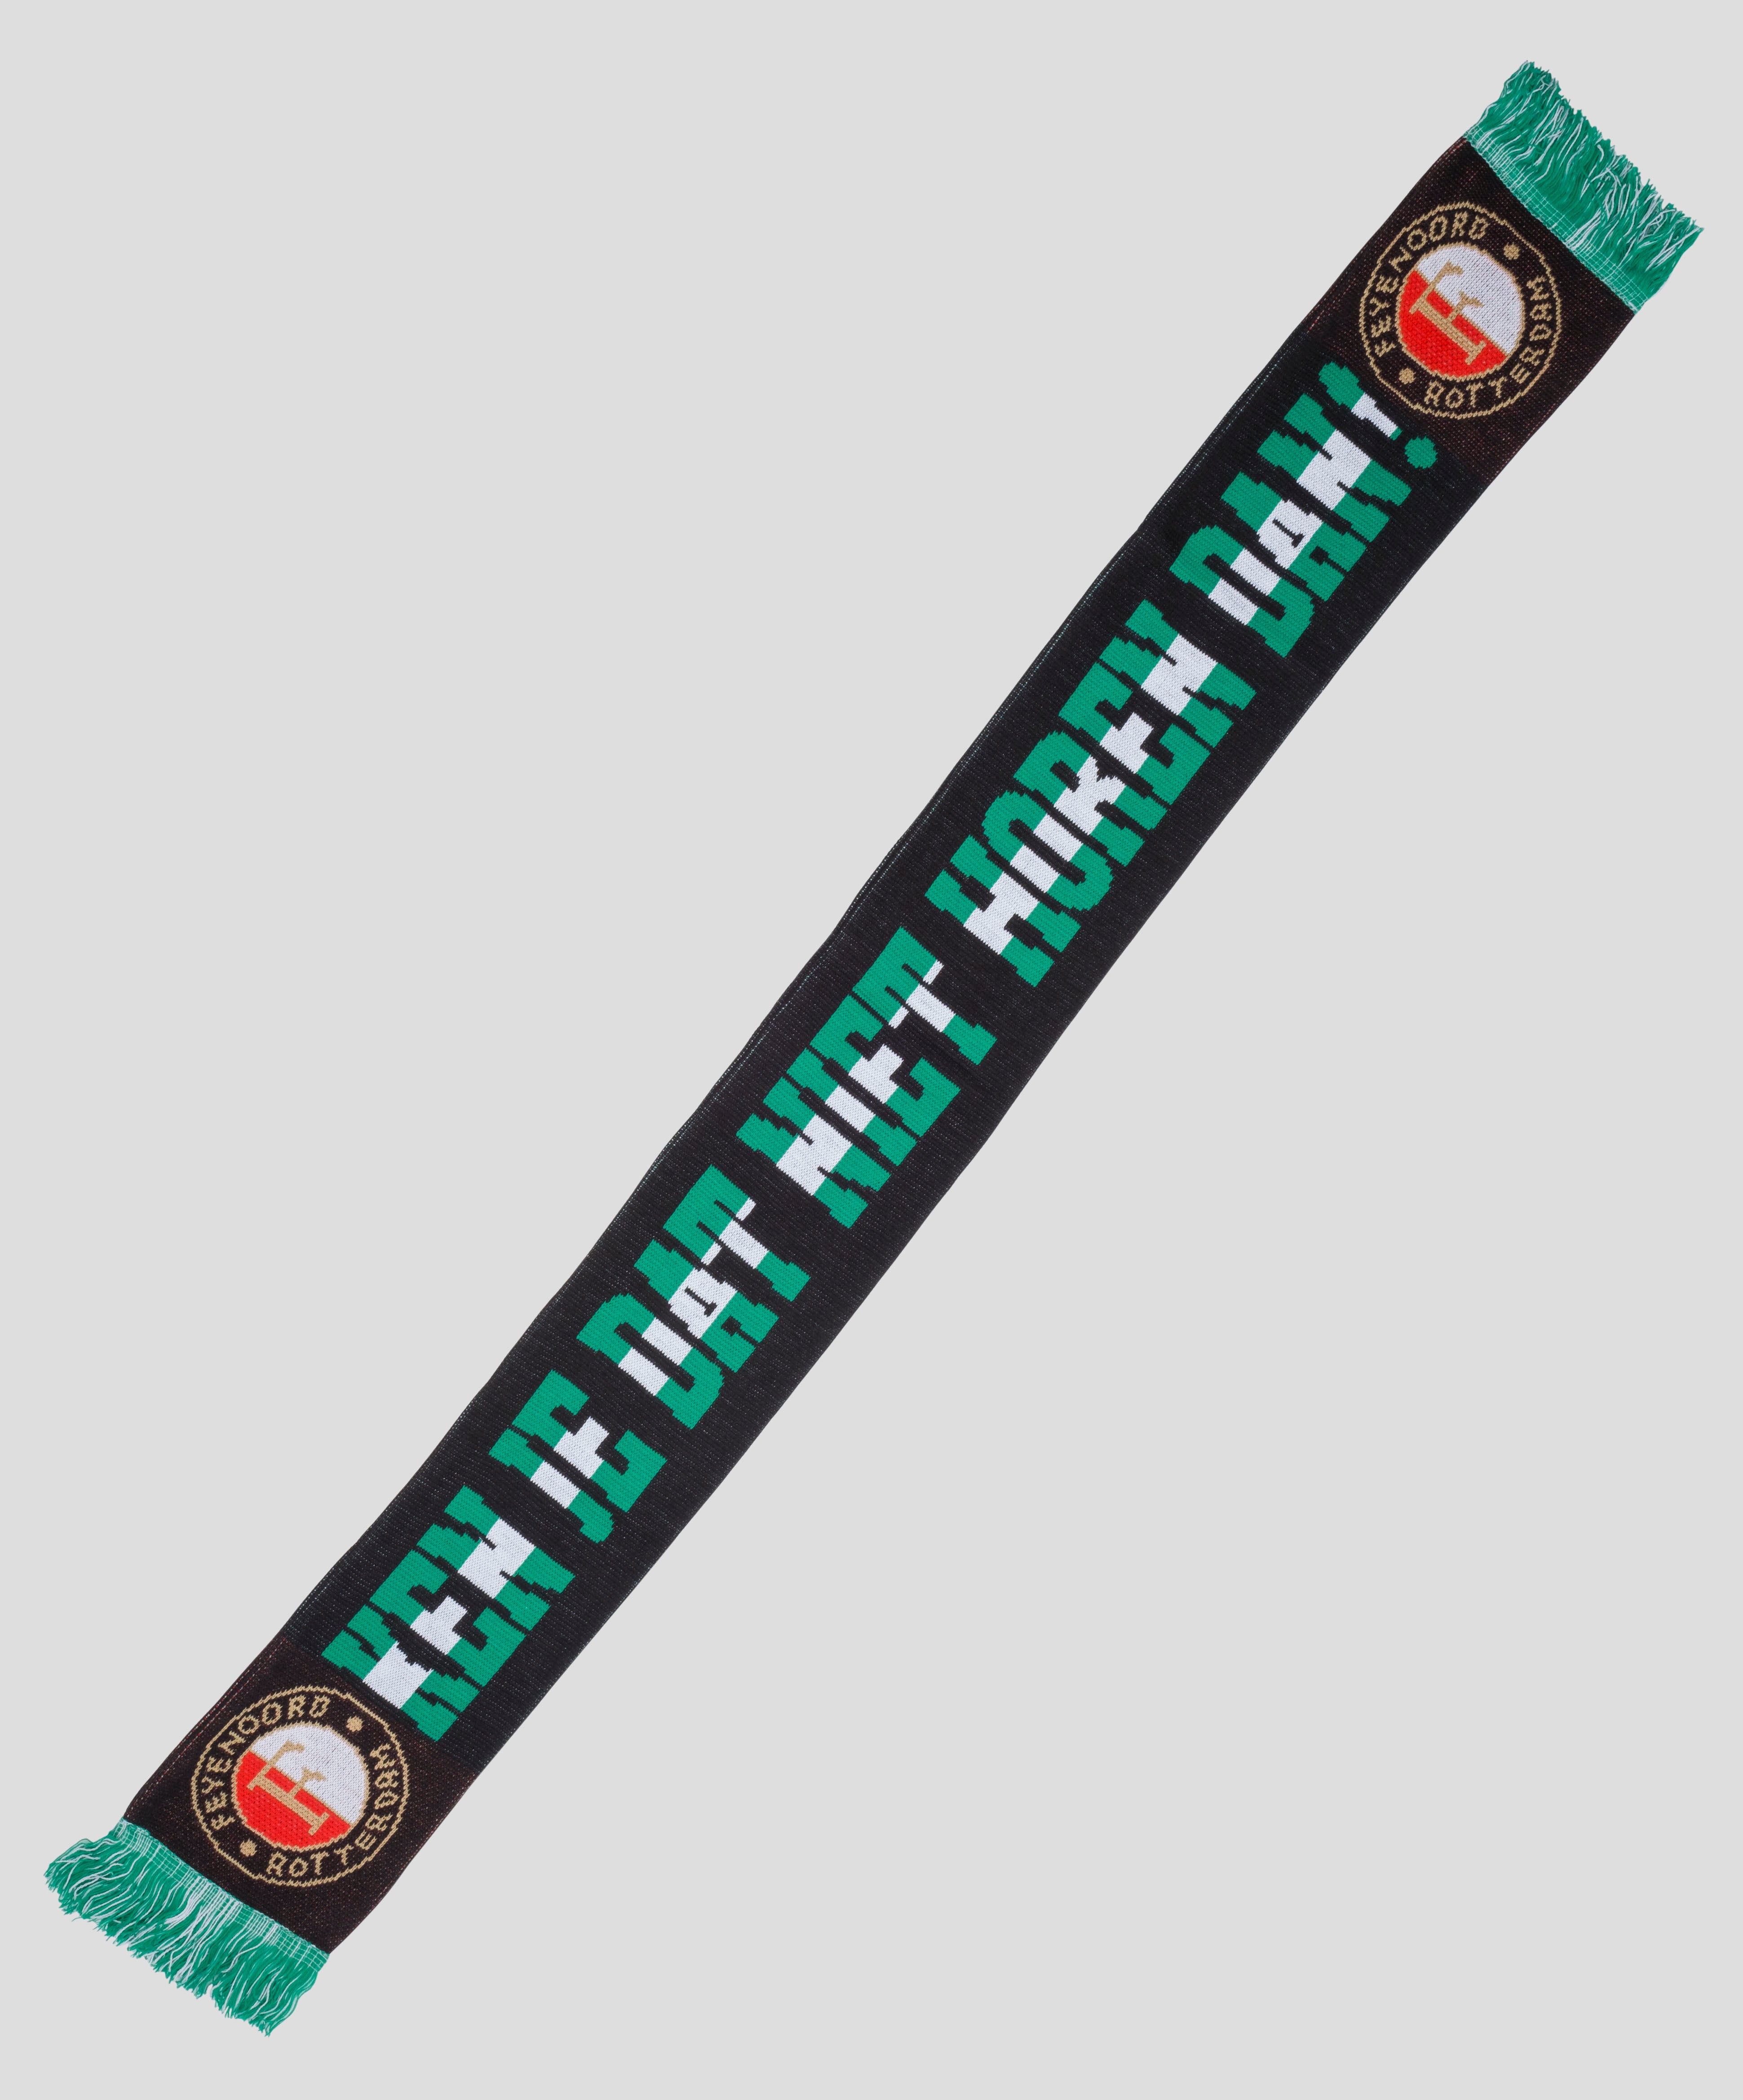 We come from Rotterdam scarf